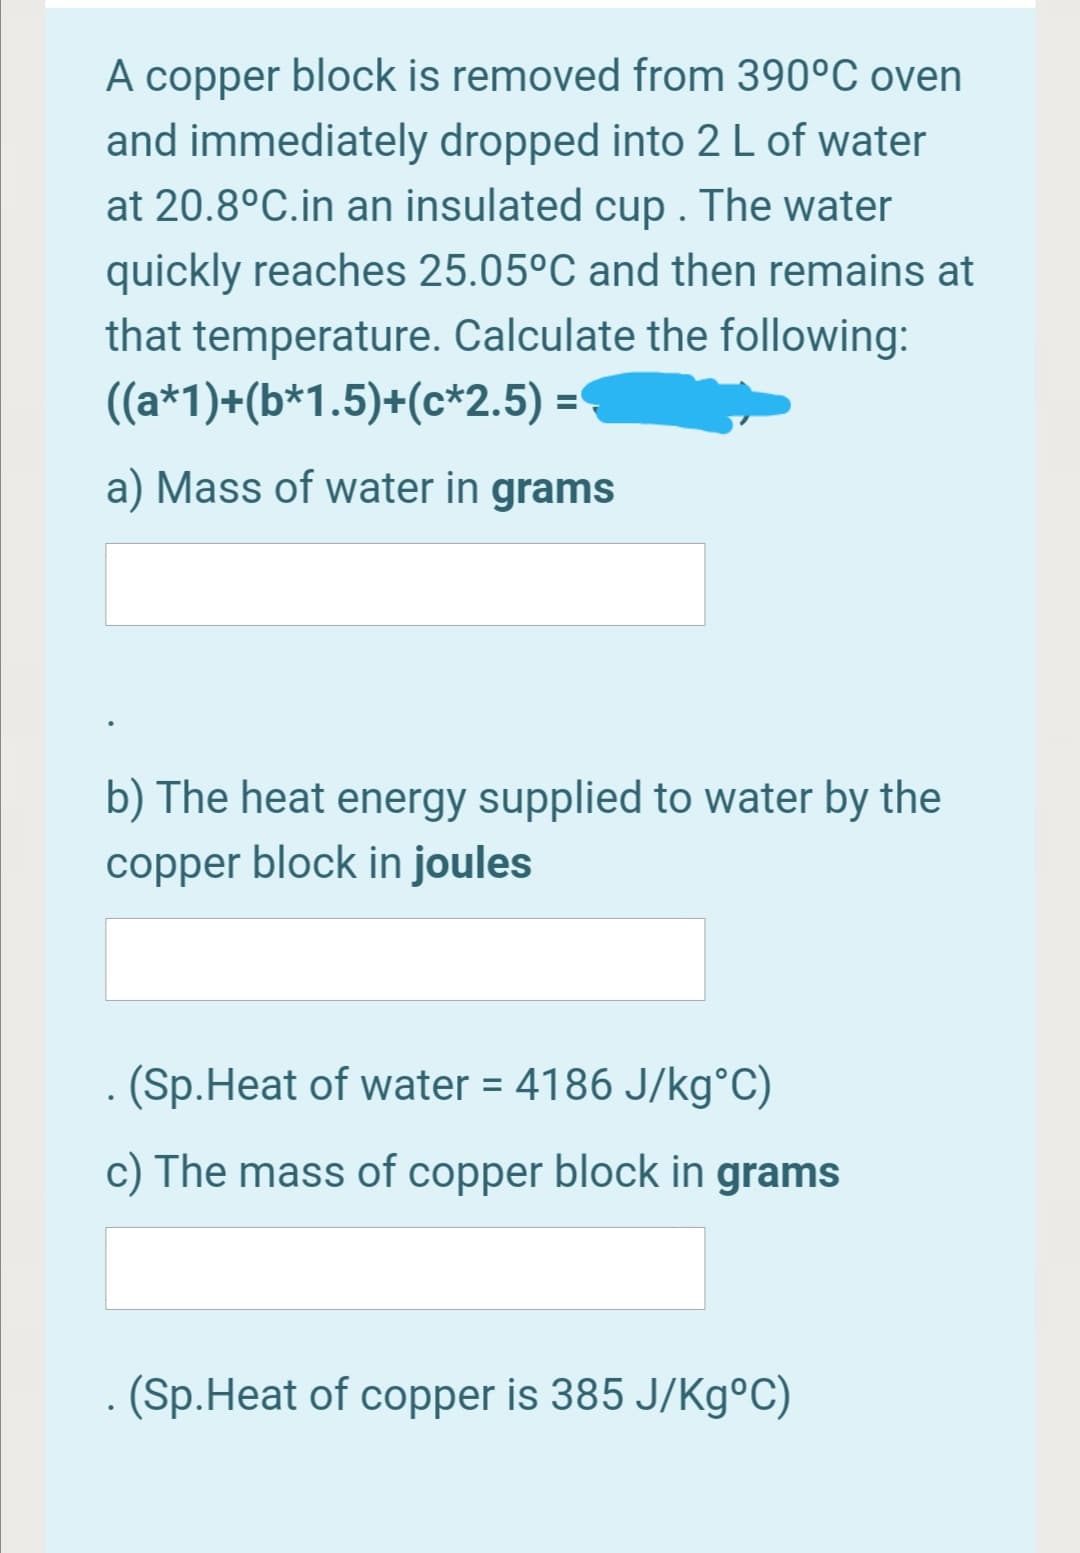 A copper block is removed from 390°C oven
and immediately dropped into 2 L of water
at 20.8°C.in an insulated cup . The water
quickly reaches 25.05°C and then remains at
that temperature. Calculate the following:
((a*1)+(b*1.5)+(c*2.5) =
a) Mass of water in grams
b) The heat energy supplied to water by the
copper block in joules
(Sp.Heat of water = 4186 J/kg°C)
c) The mass of copper block in grams
- (Sp.Heat of copper is 385 J/Kg°C)
